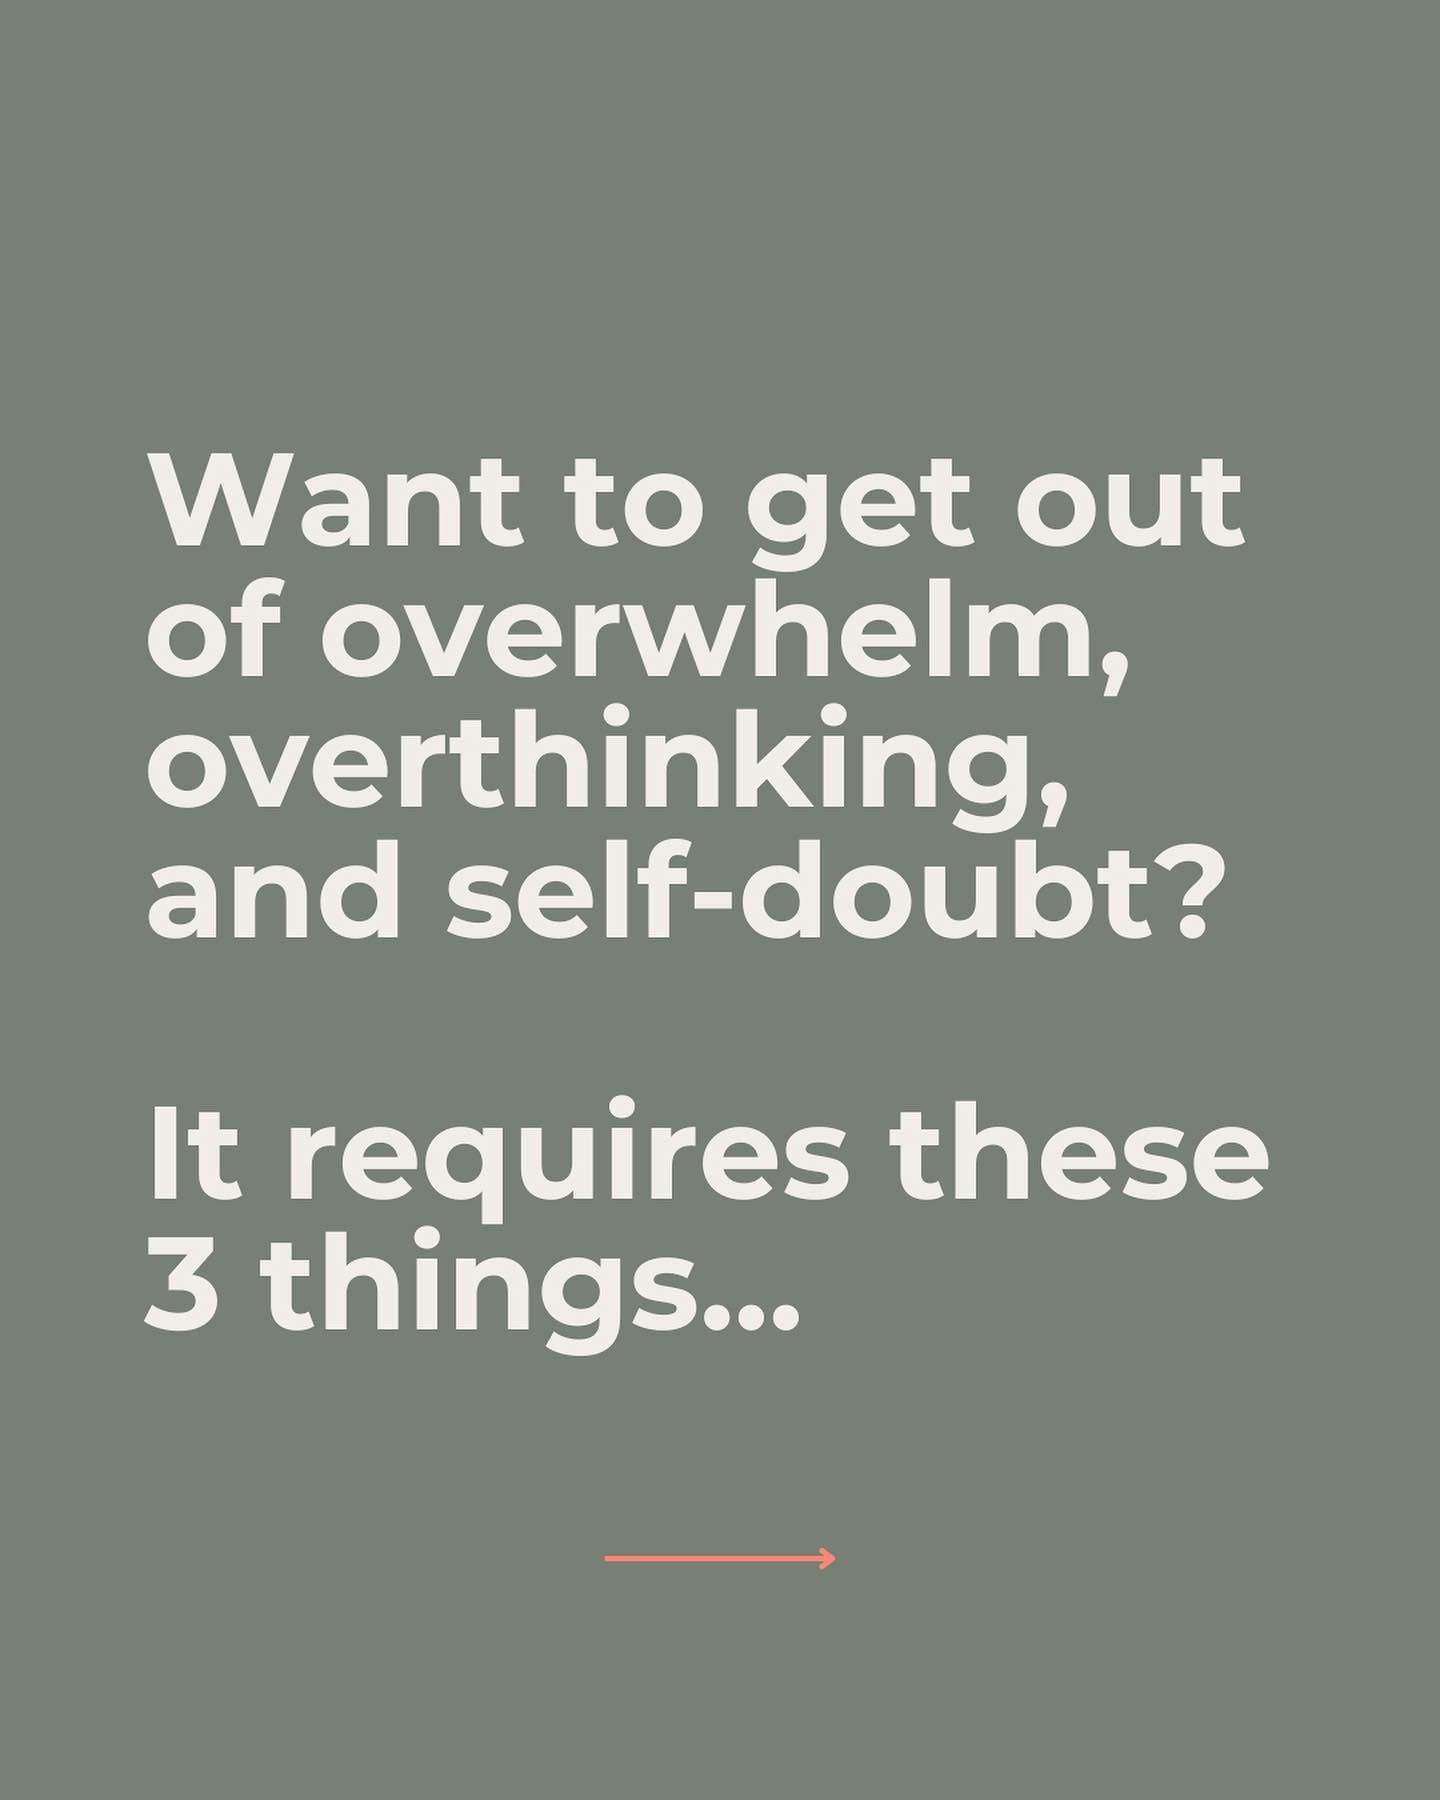 The closest thing I&rsquo;ve found to a quick fix for finally getting out of overwhelm, overthinking, and self-doubt is an openness to looking at the world a little differently. 

You in? 

#stressmanagement #stressmitigation #stresscoaching #stressr